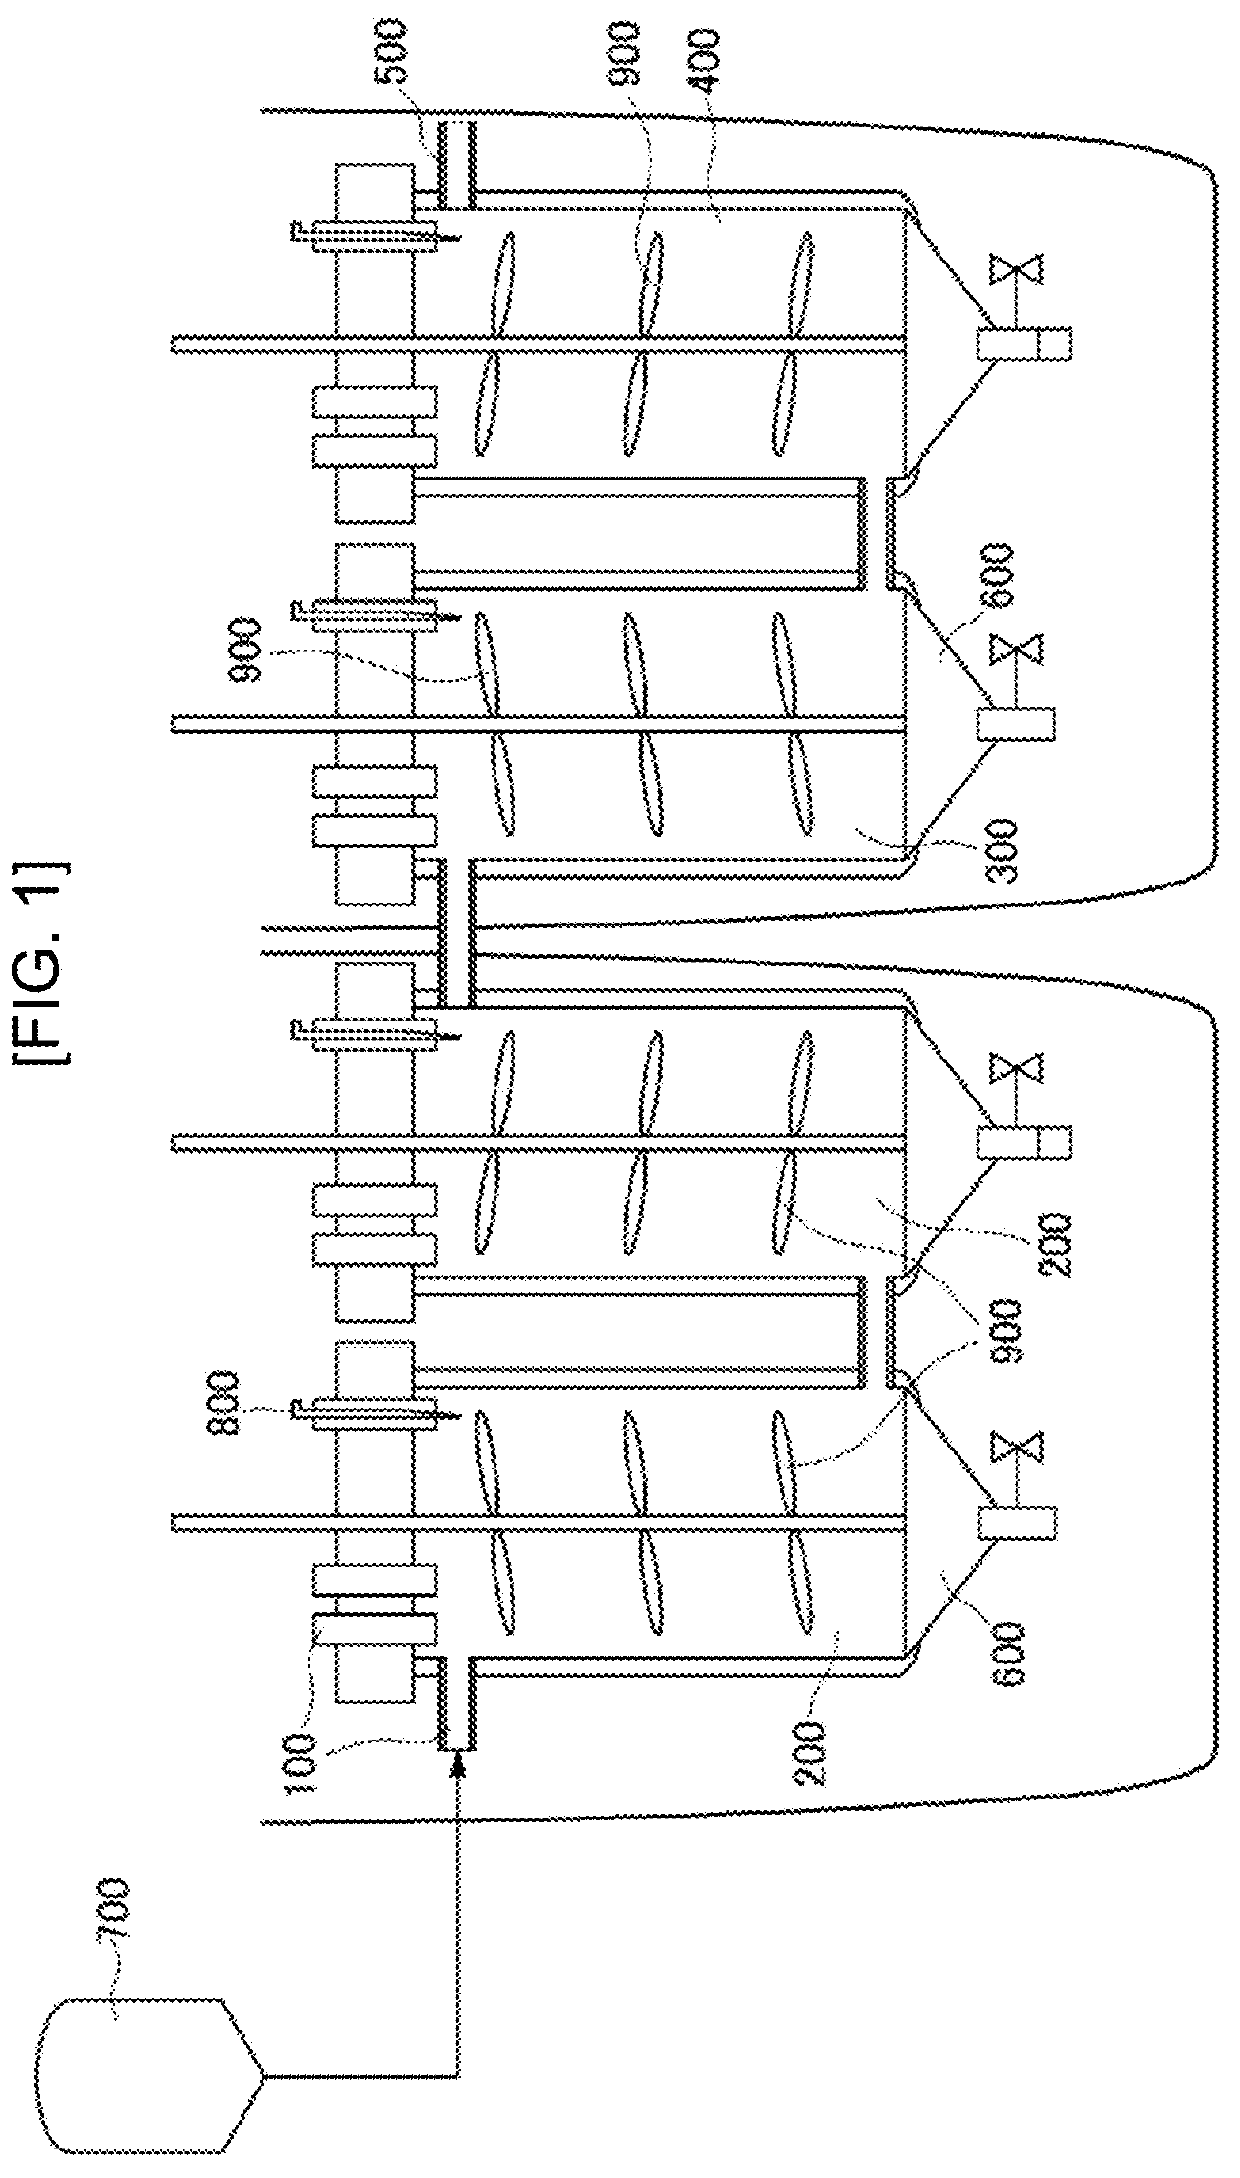 Apparatus and process for continuous saccharification of marine algae and cellulosic biomass